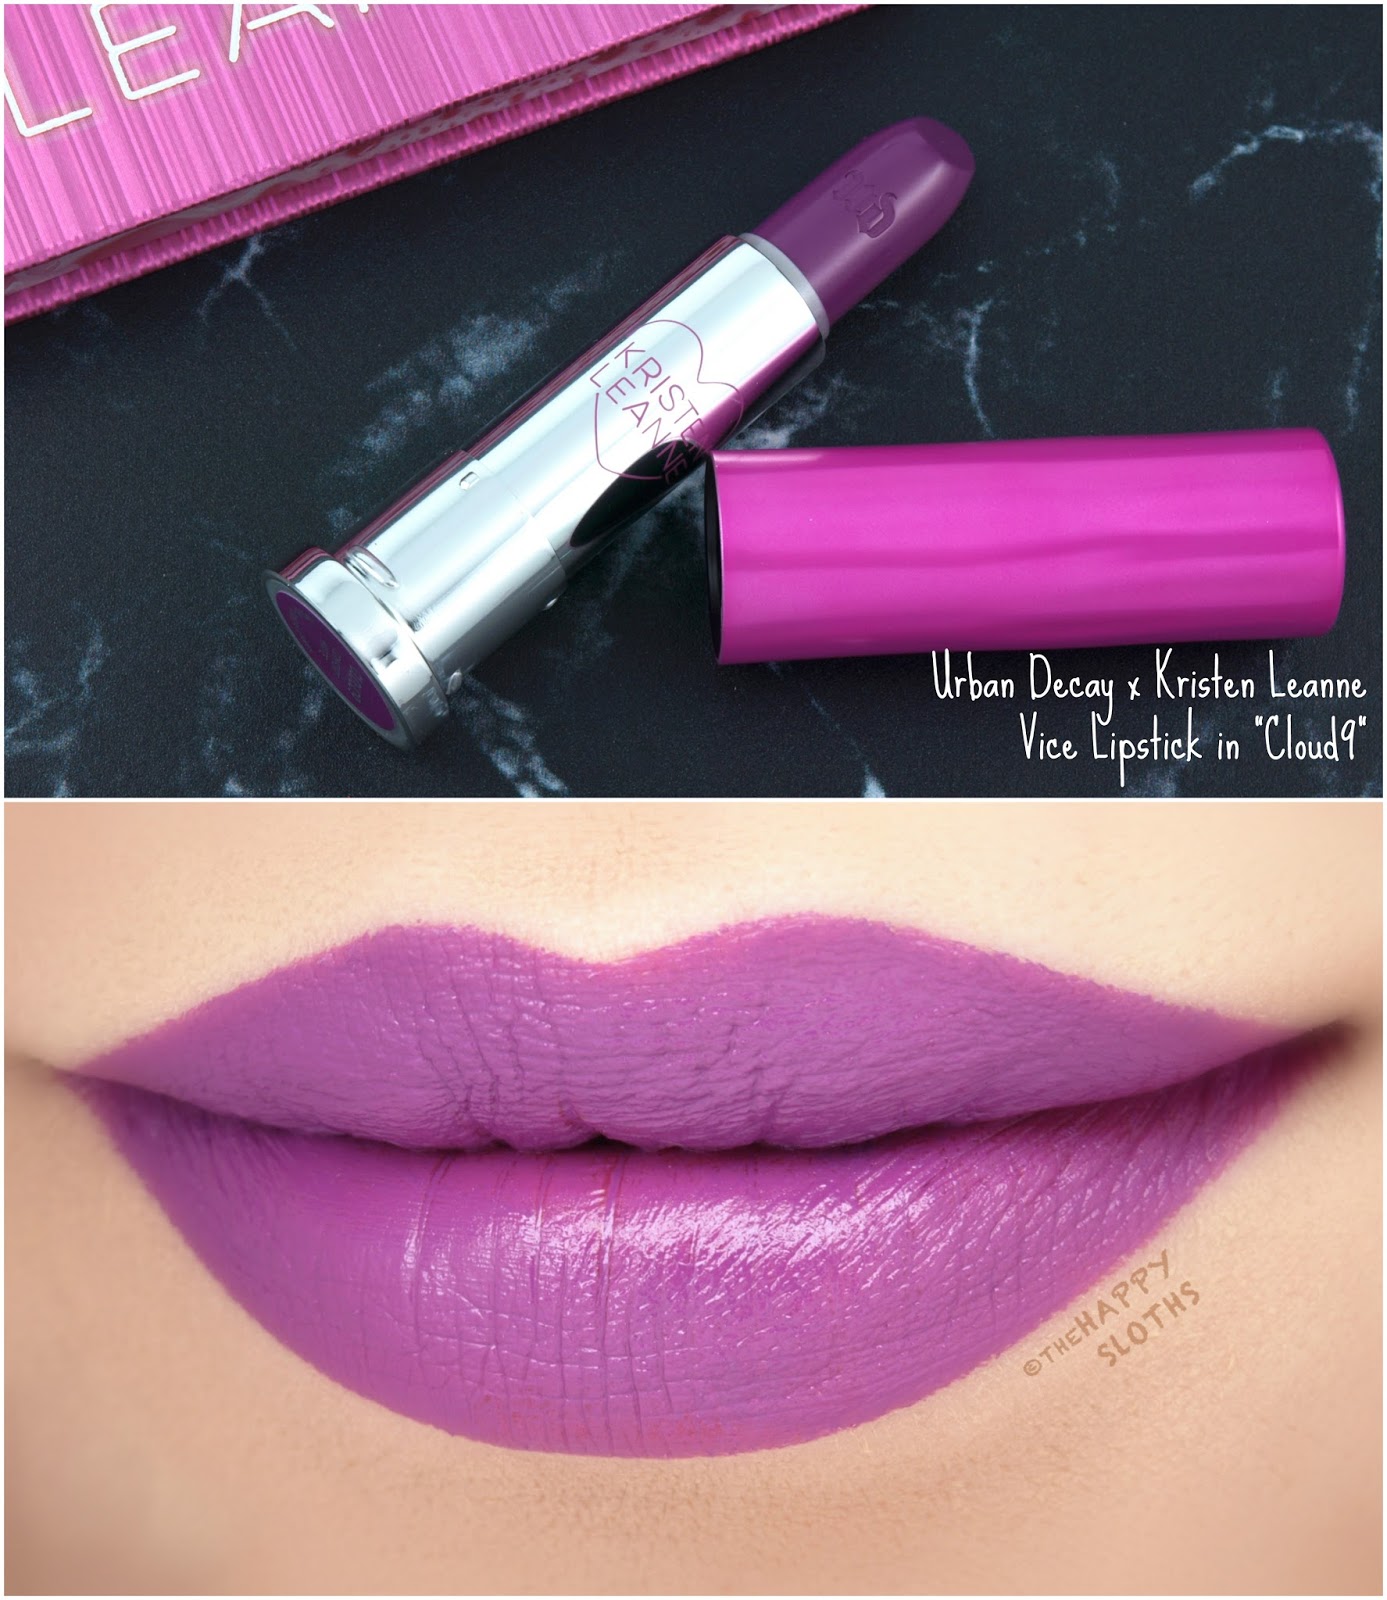 Urban Decay x Kristen Leanne Vice Lipstick in Cloud9: Review and Swatches